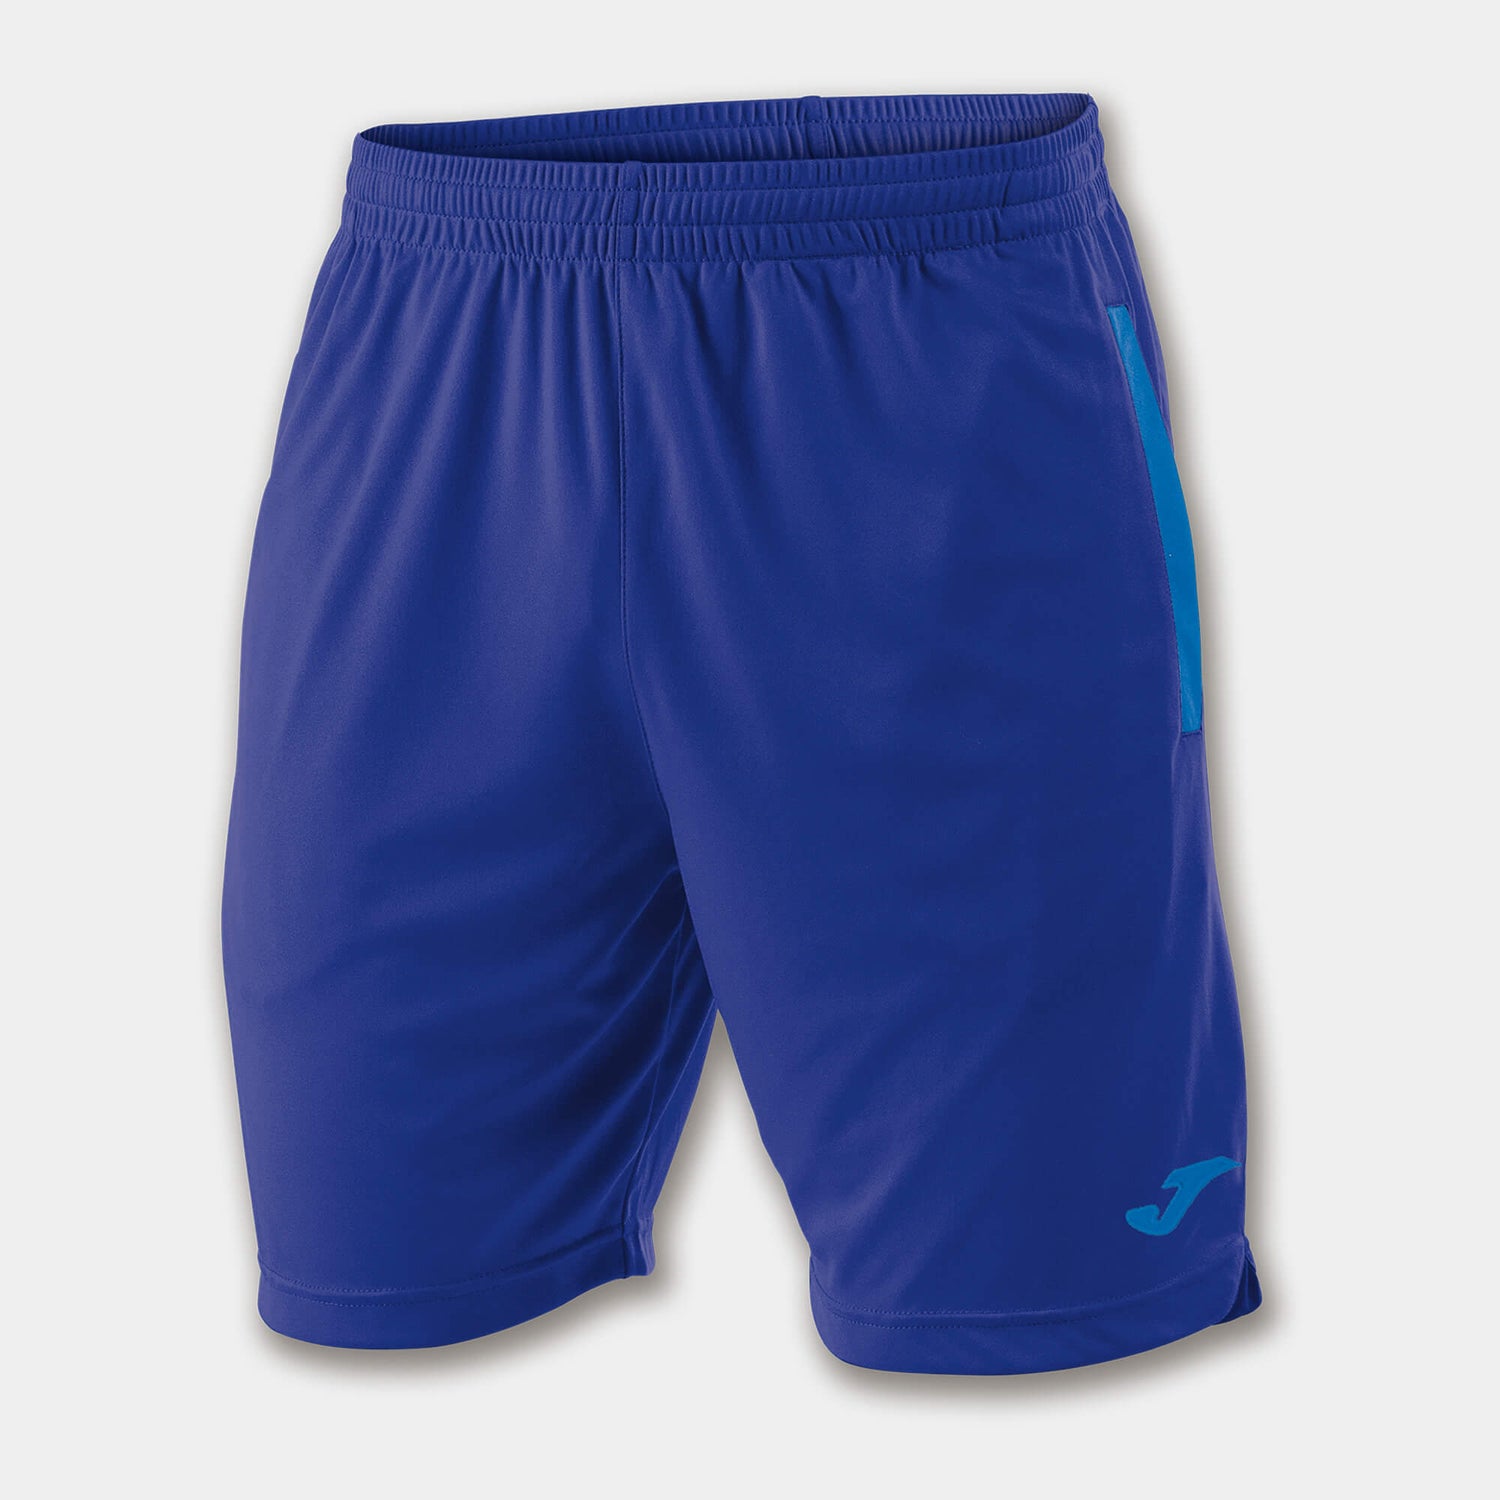 Joma Shorts Collection for Men, Women and Youth